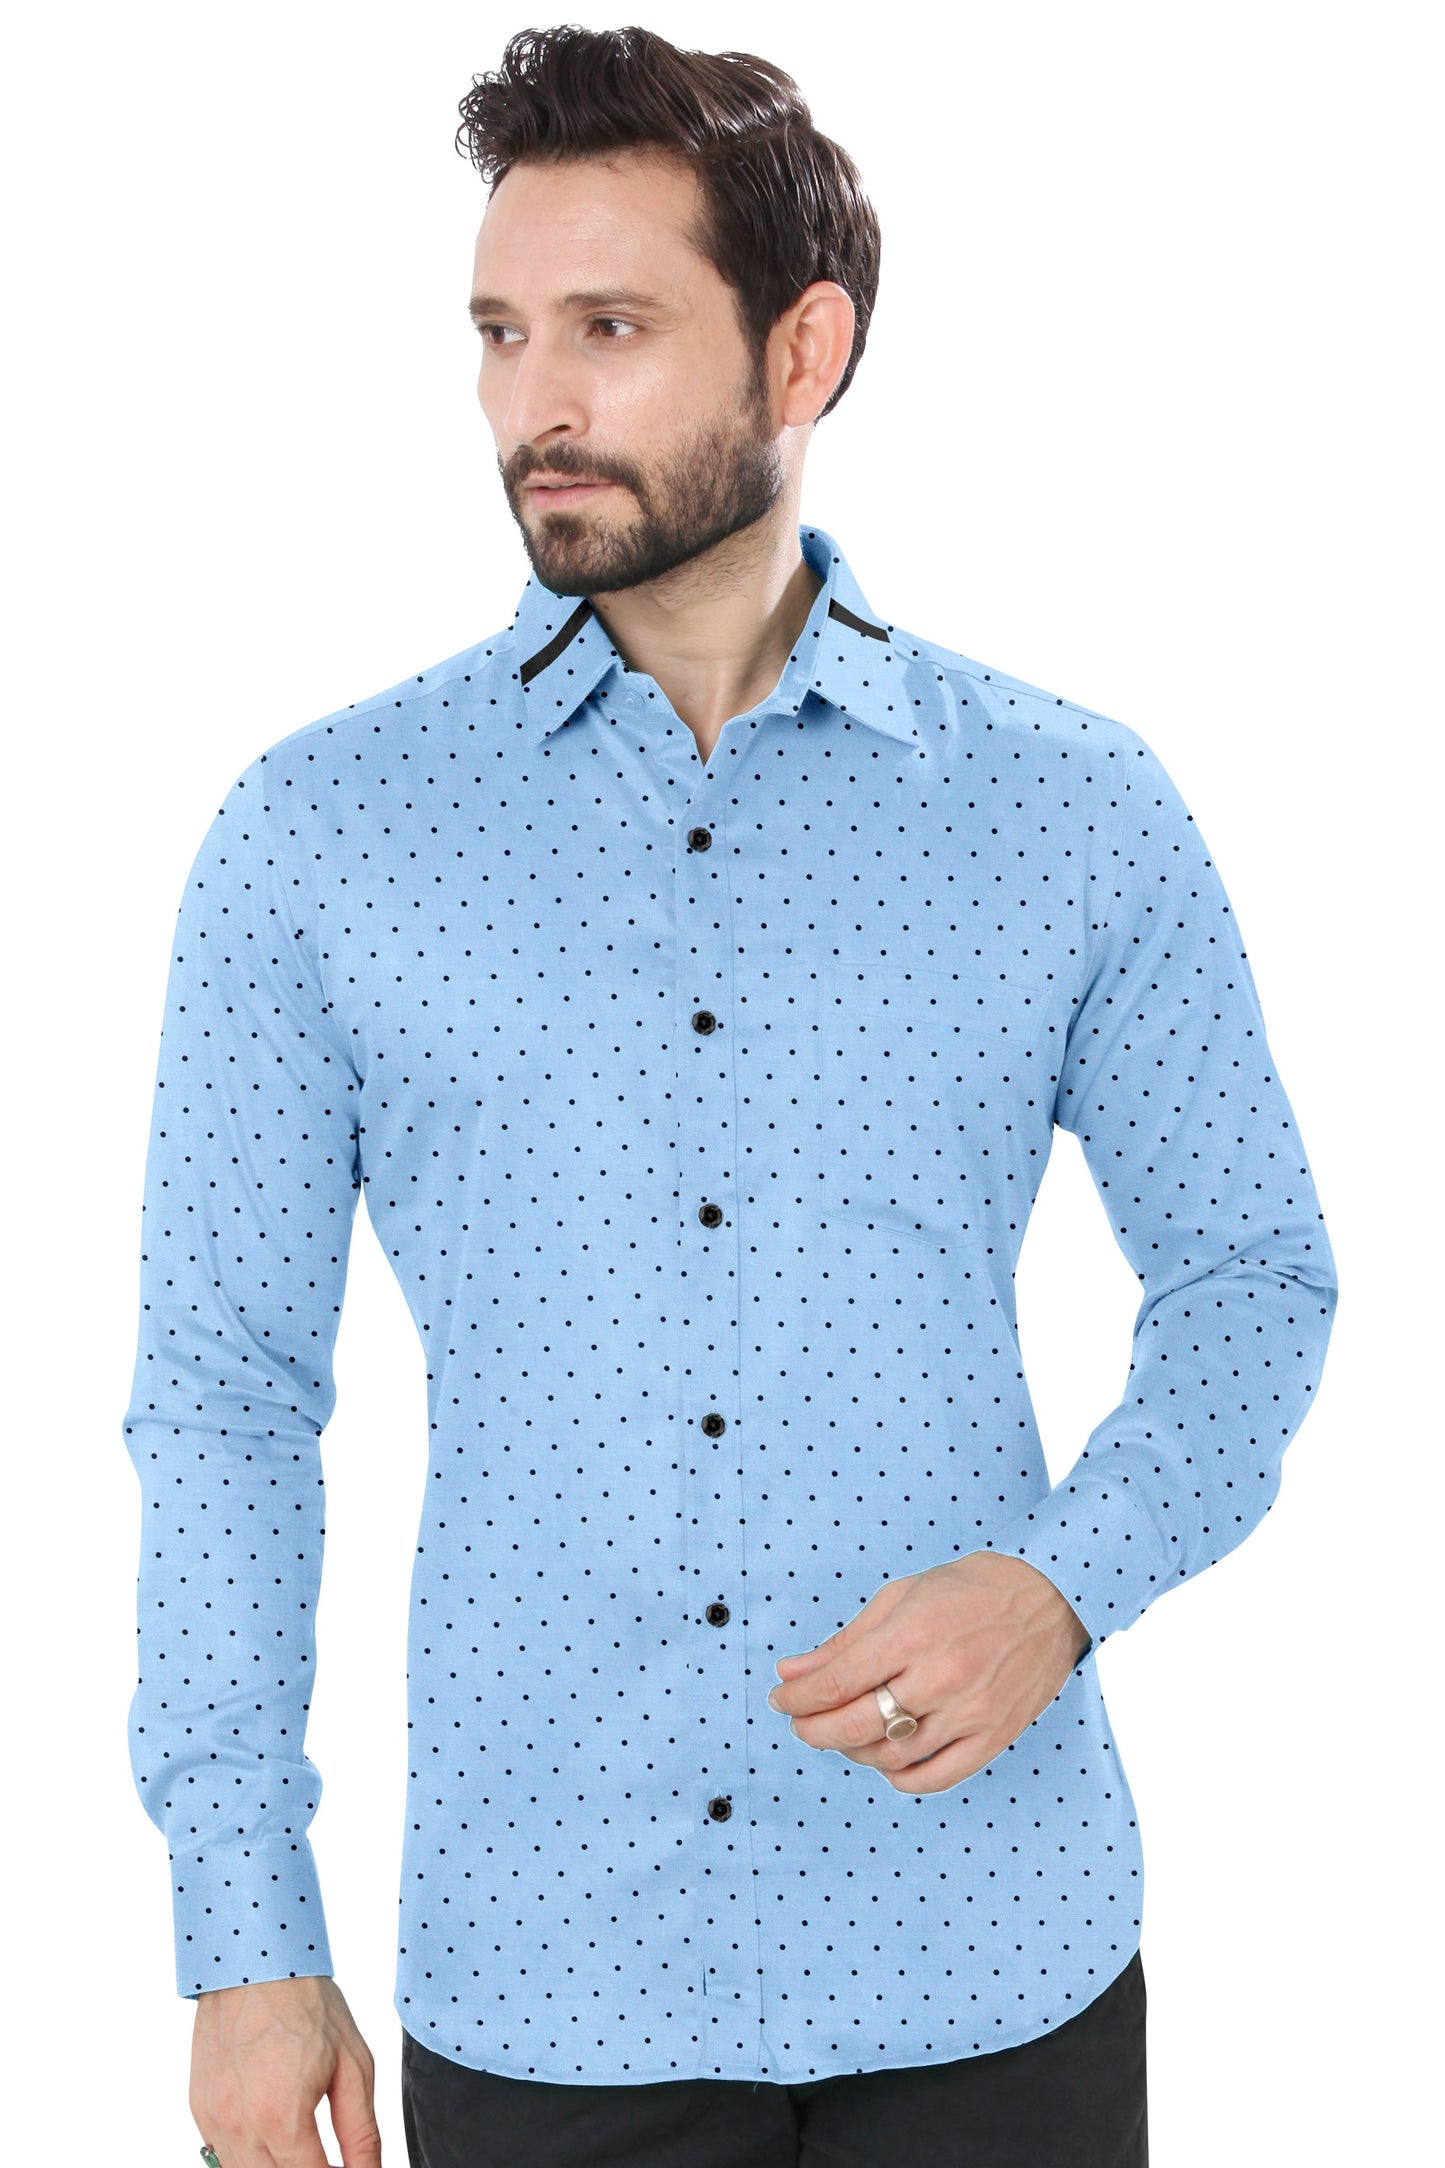 Men's Blue Black DOtted Casual Shirt Full Sleeves 100% Cotton 